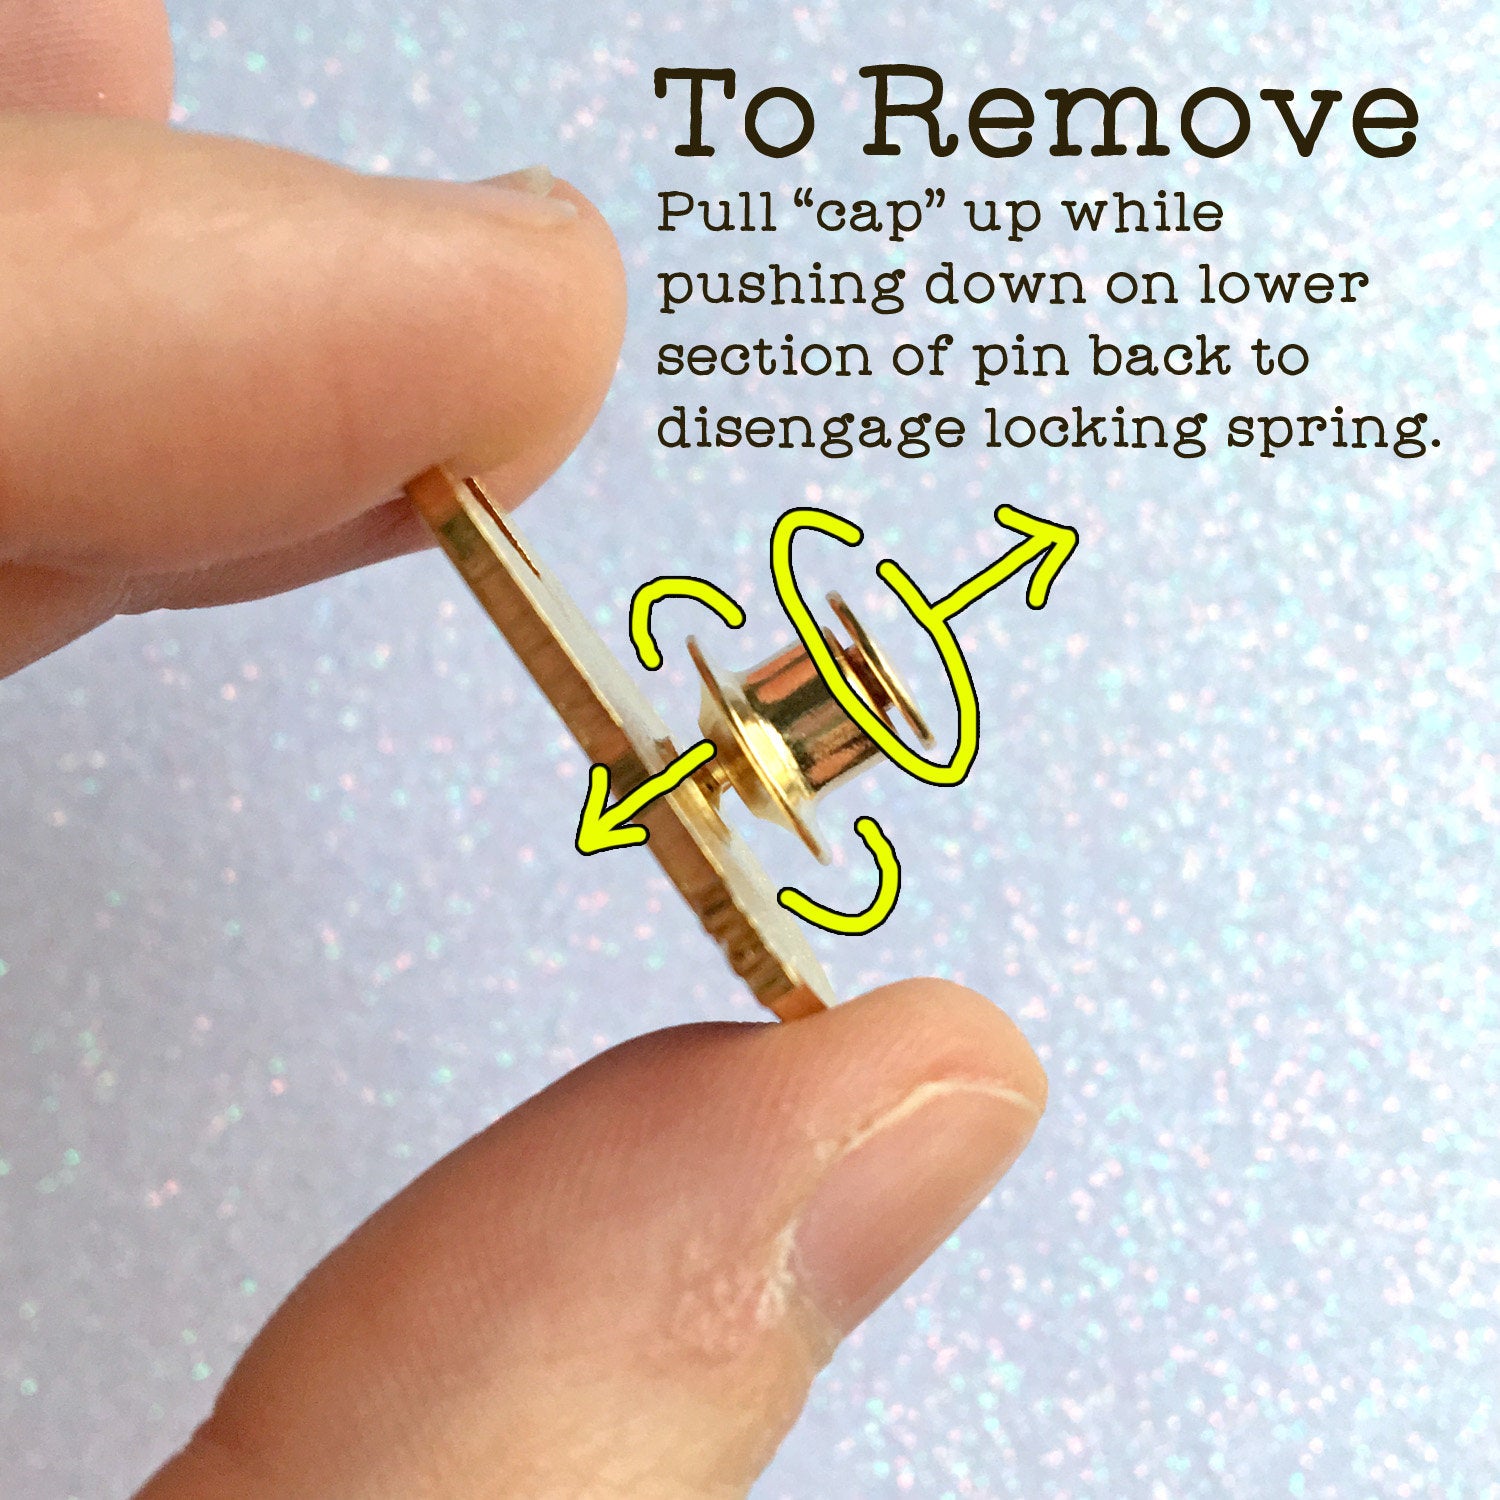 How To Get A Locking Pin Back Off